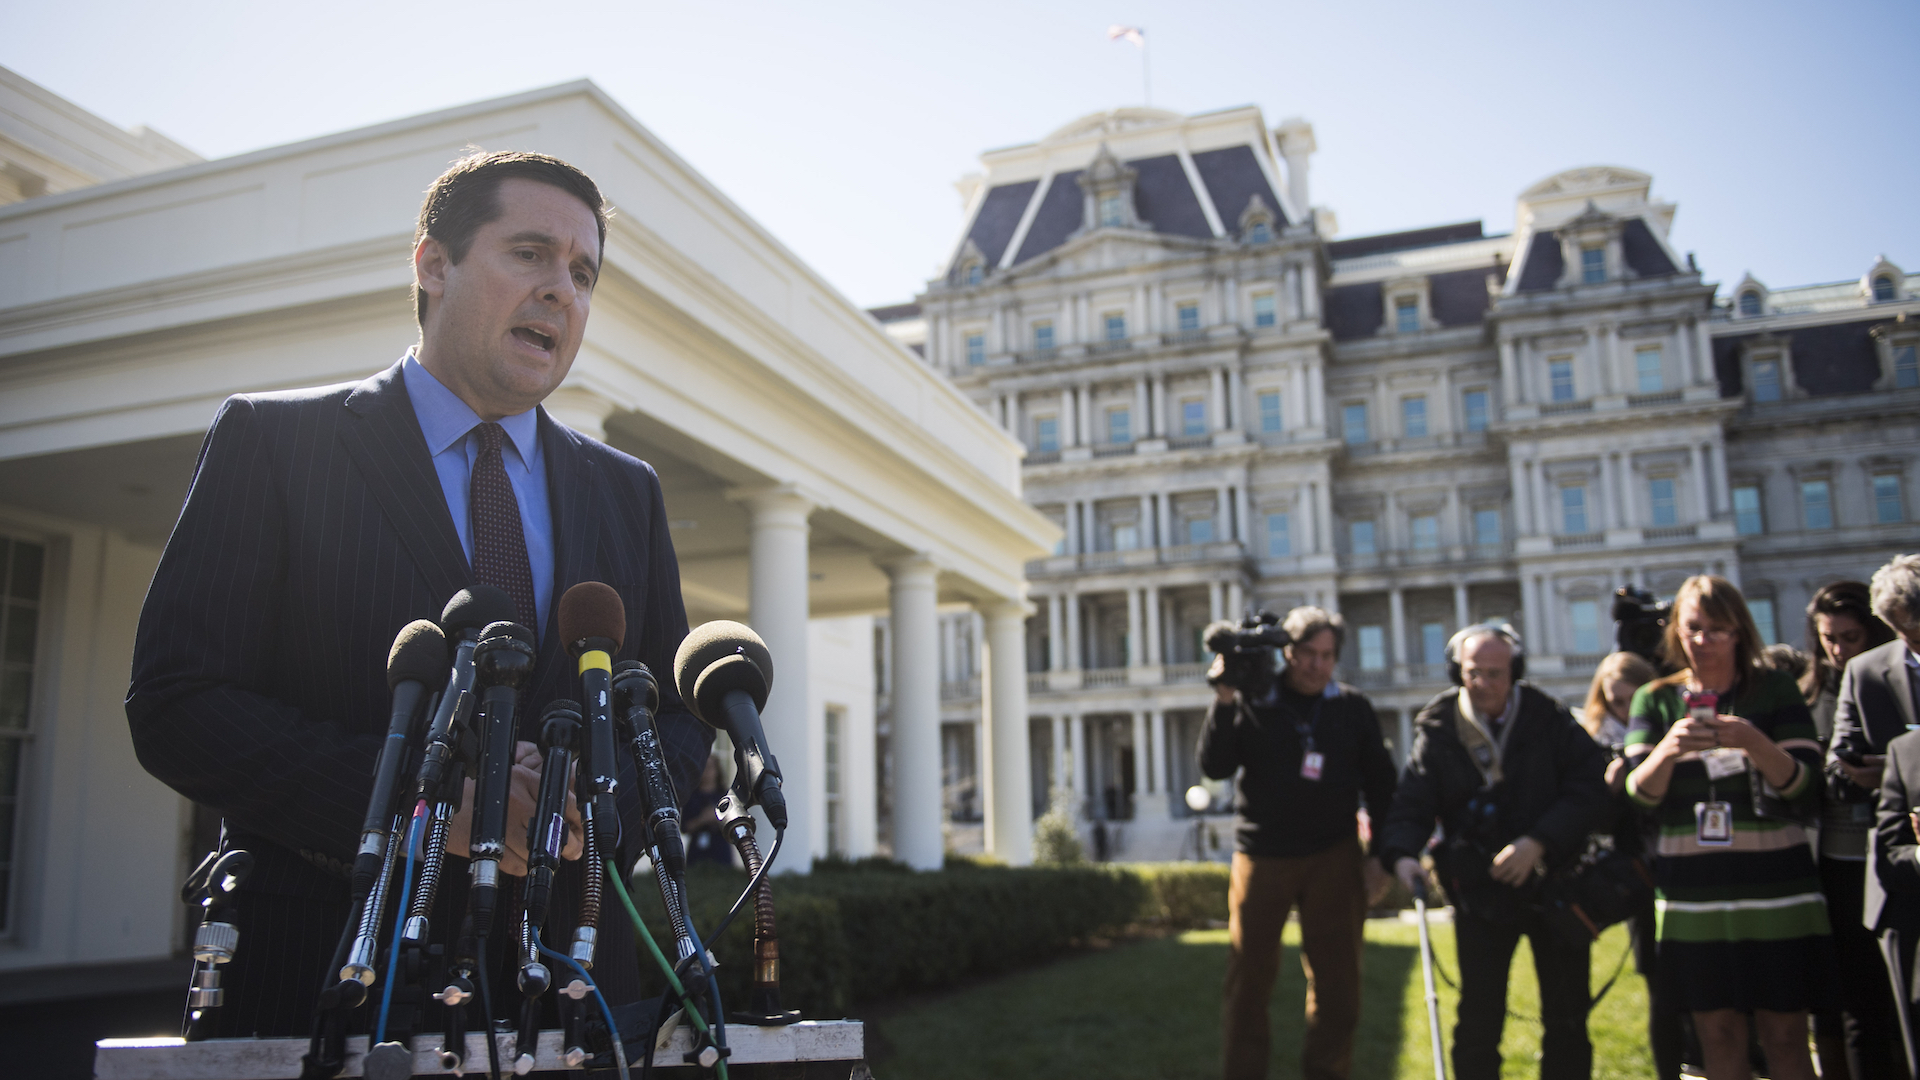 House Intelligence Committee Chairman Rep. Devin Nunes, R-Calif., speaks with reporters outside the White House following a meeting with President Donald Trump in Washington, DC on Wednesday, March. 22, 2017. (The Washington Post&mdash;The Washington Post/Getty Images)